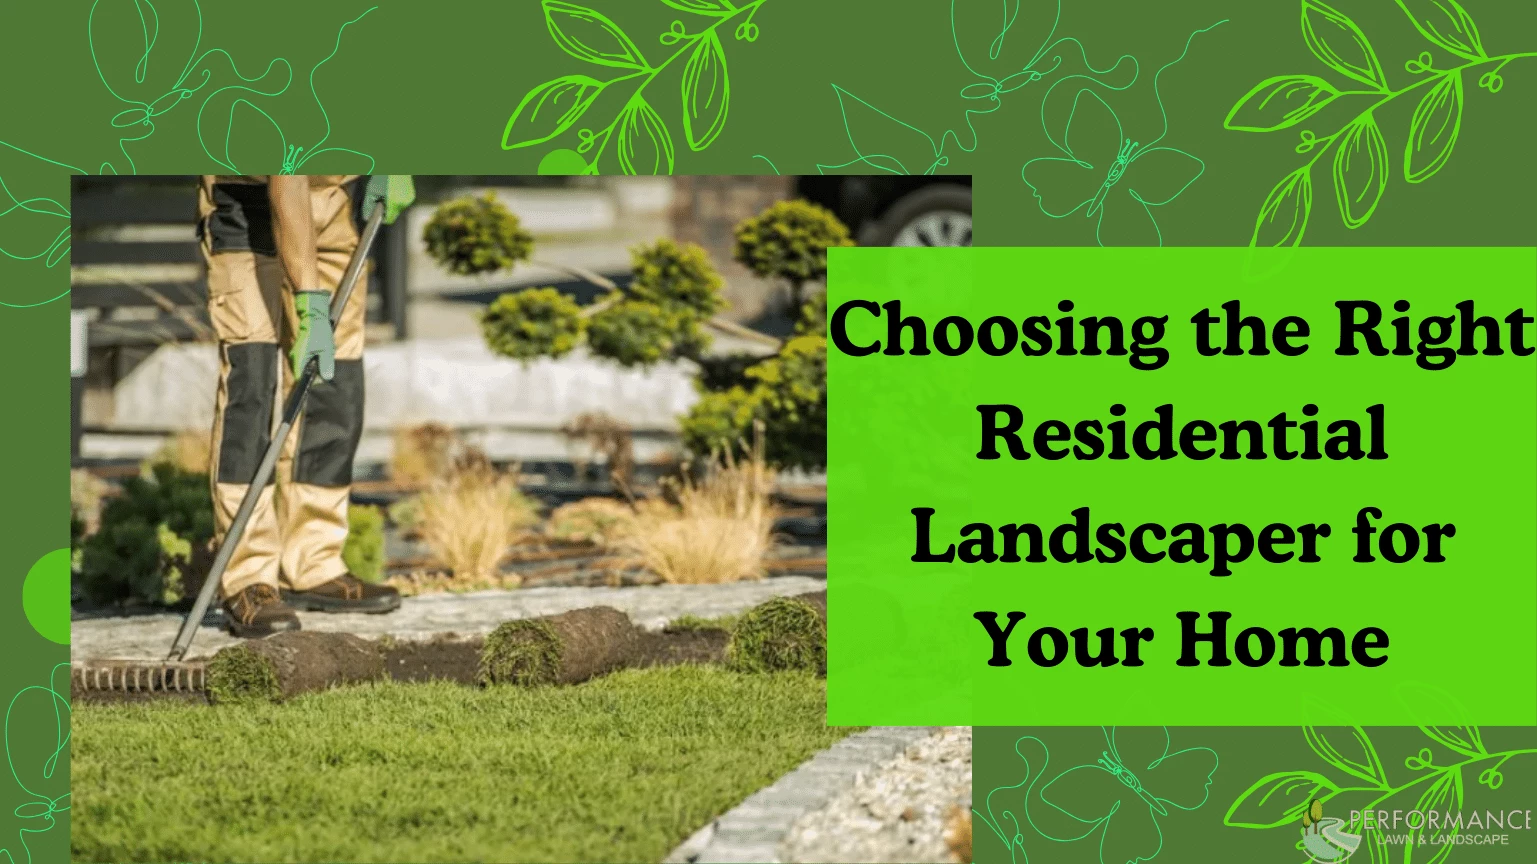 Choosing the Right Residential Landscaper for Your Home